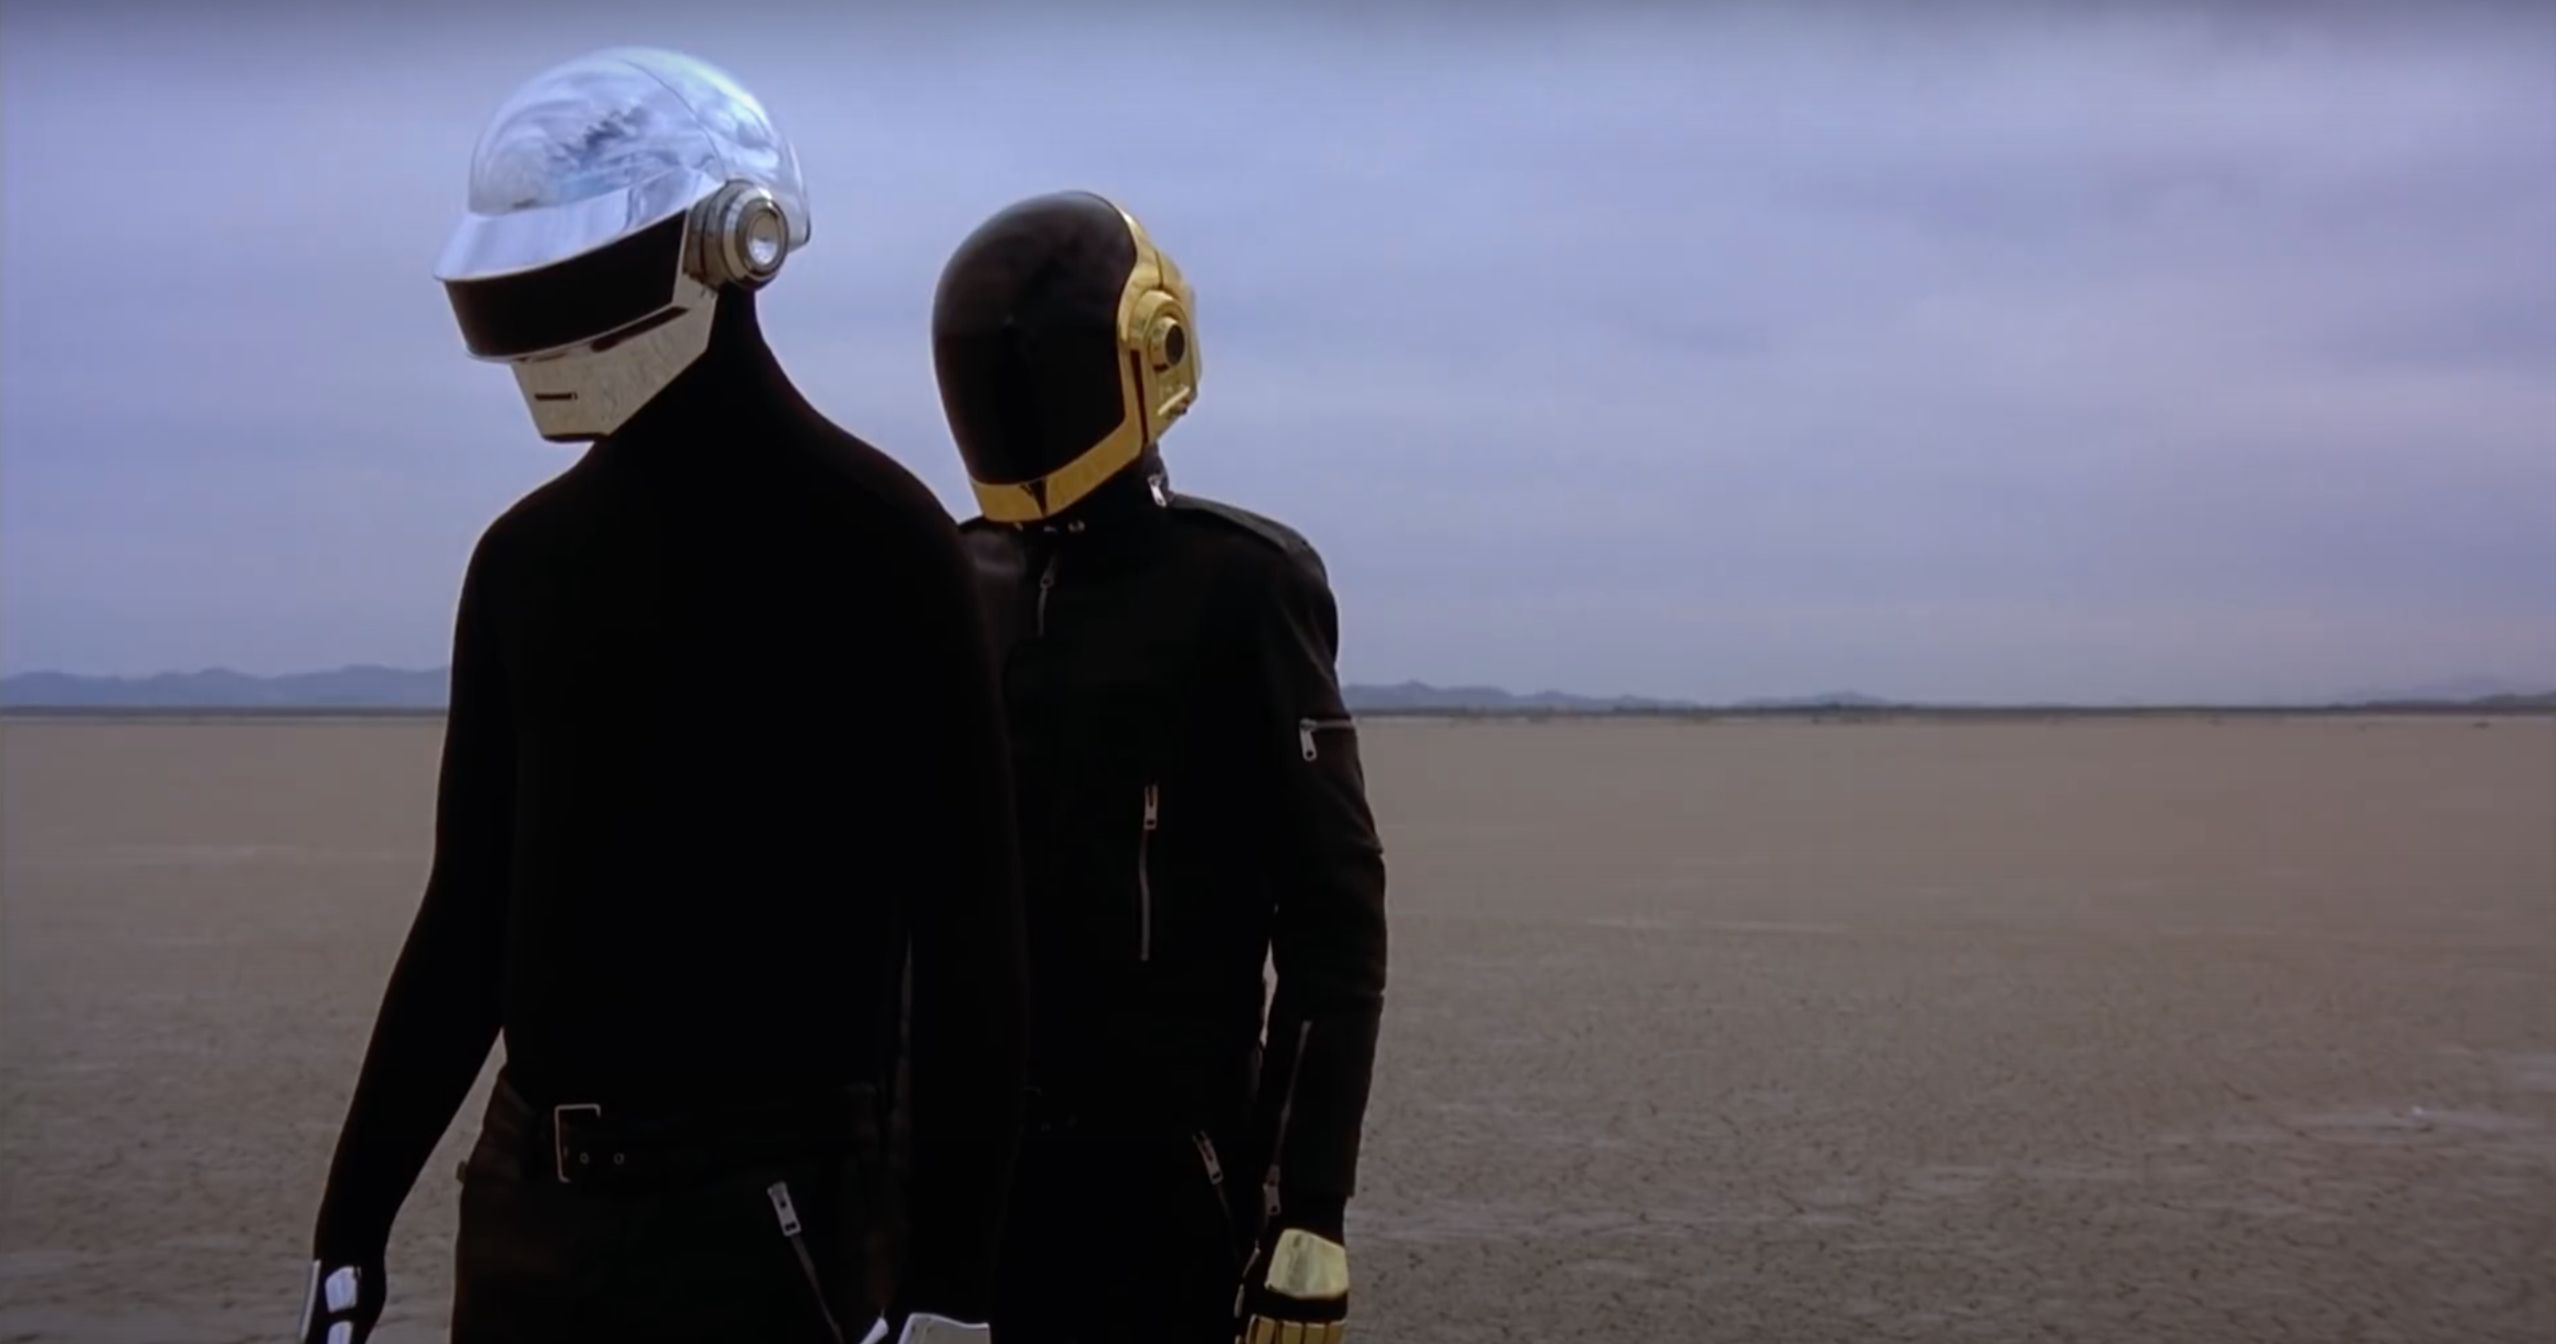 Daft Punk Calls It Quits After 28 Years